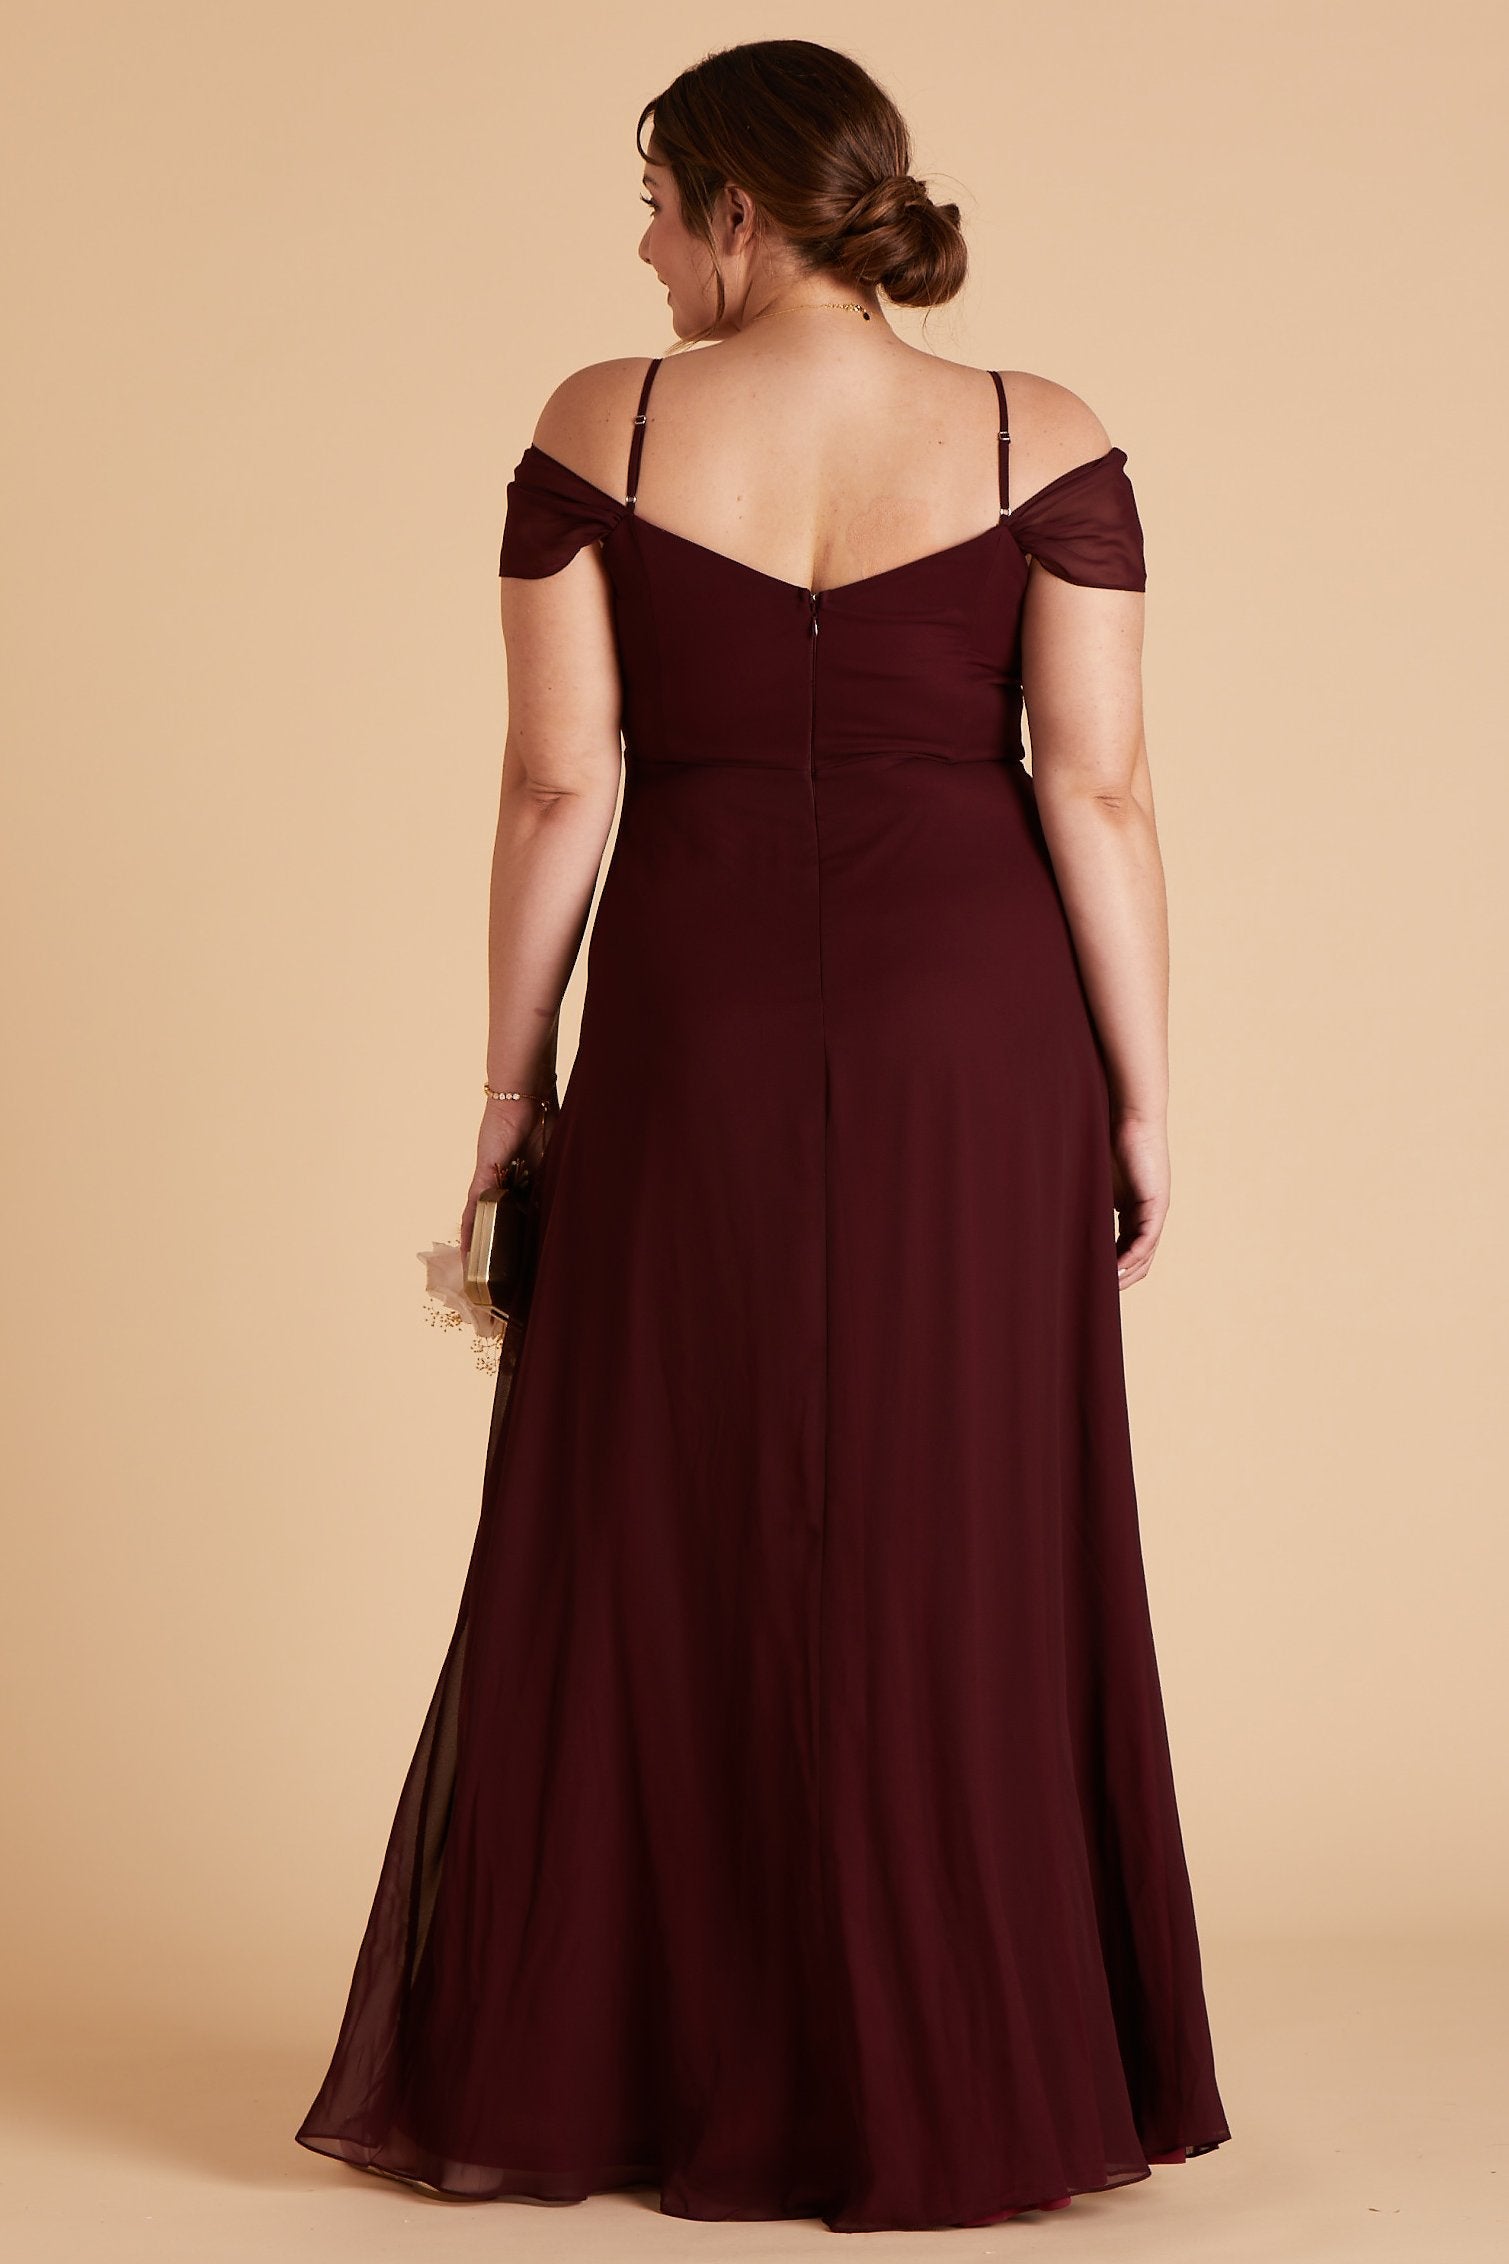 Spence convertible plus size bridesmaid dress in cabernet burgundy chiffon by Birdy Grey, back view